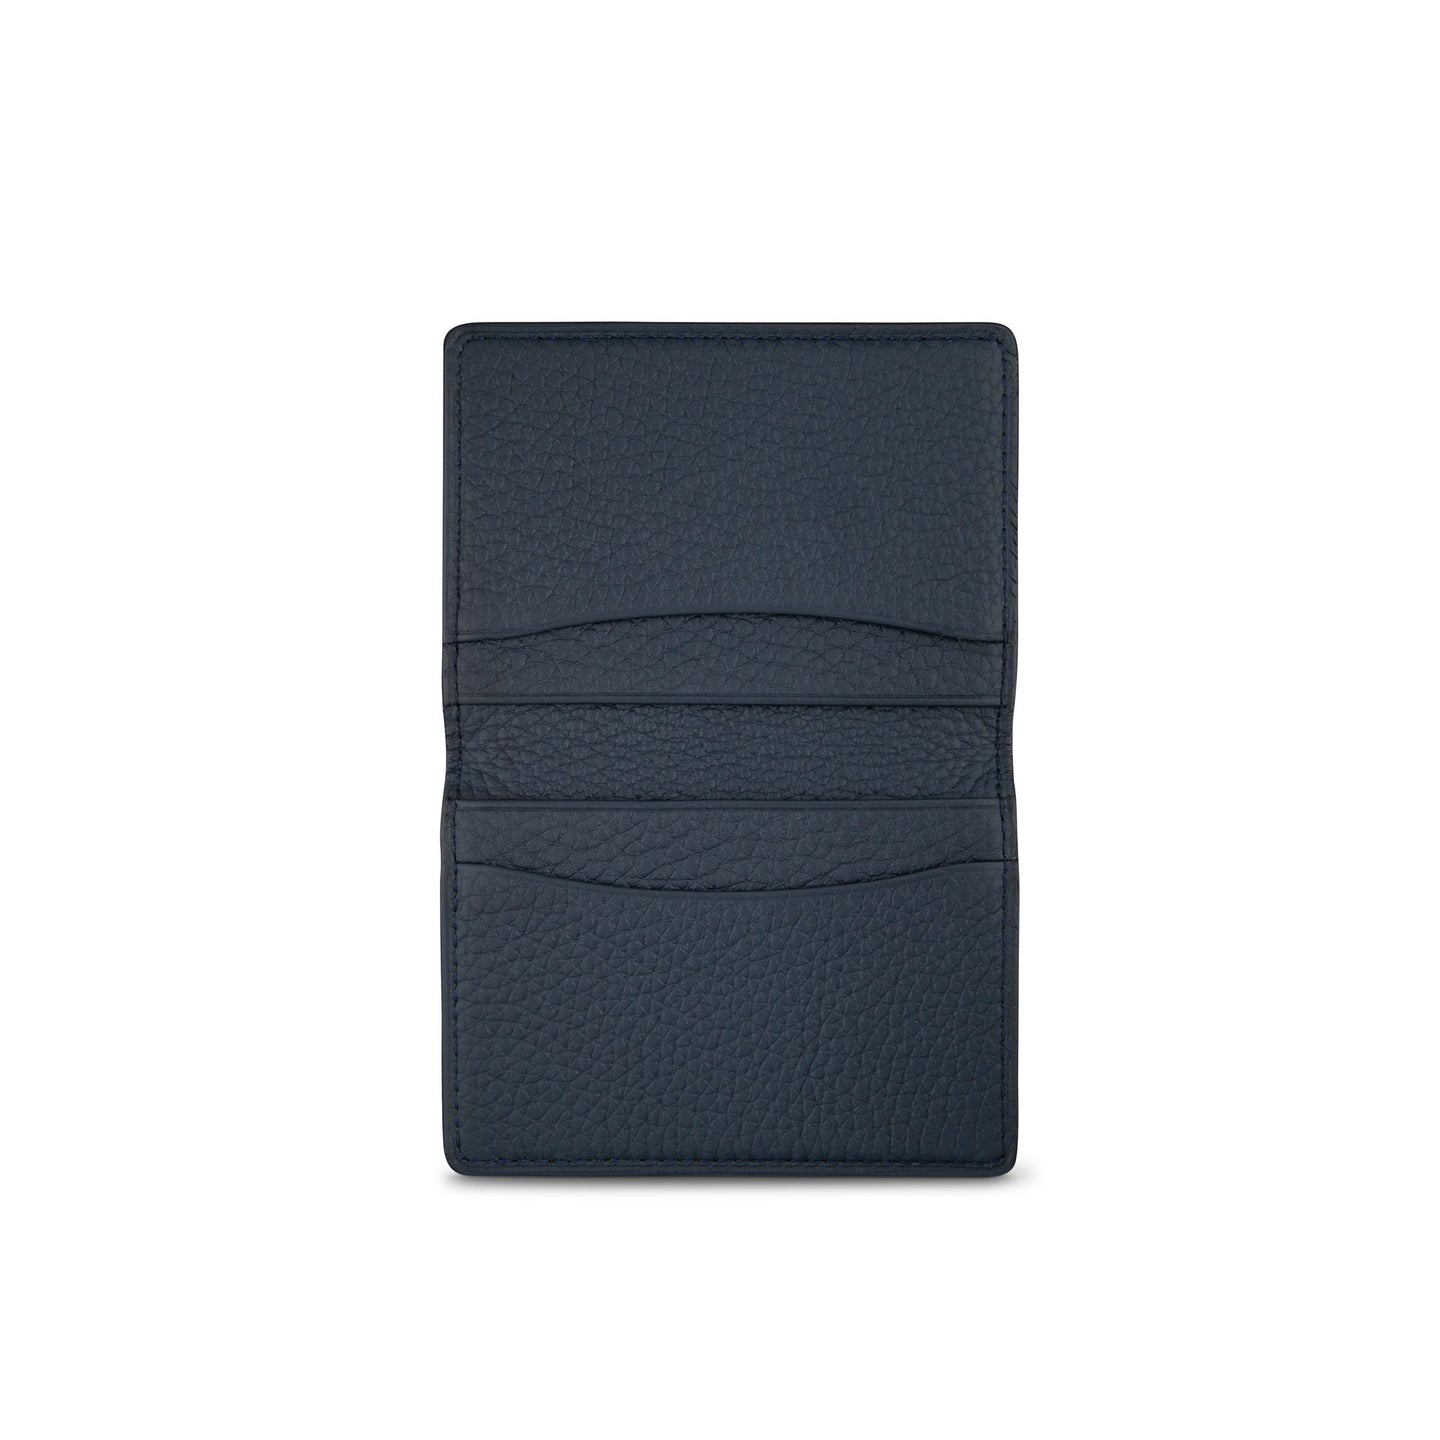 GMT Flat Card Holder in Soft Grain Leather